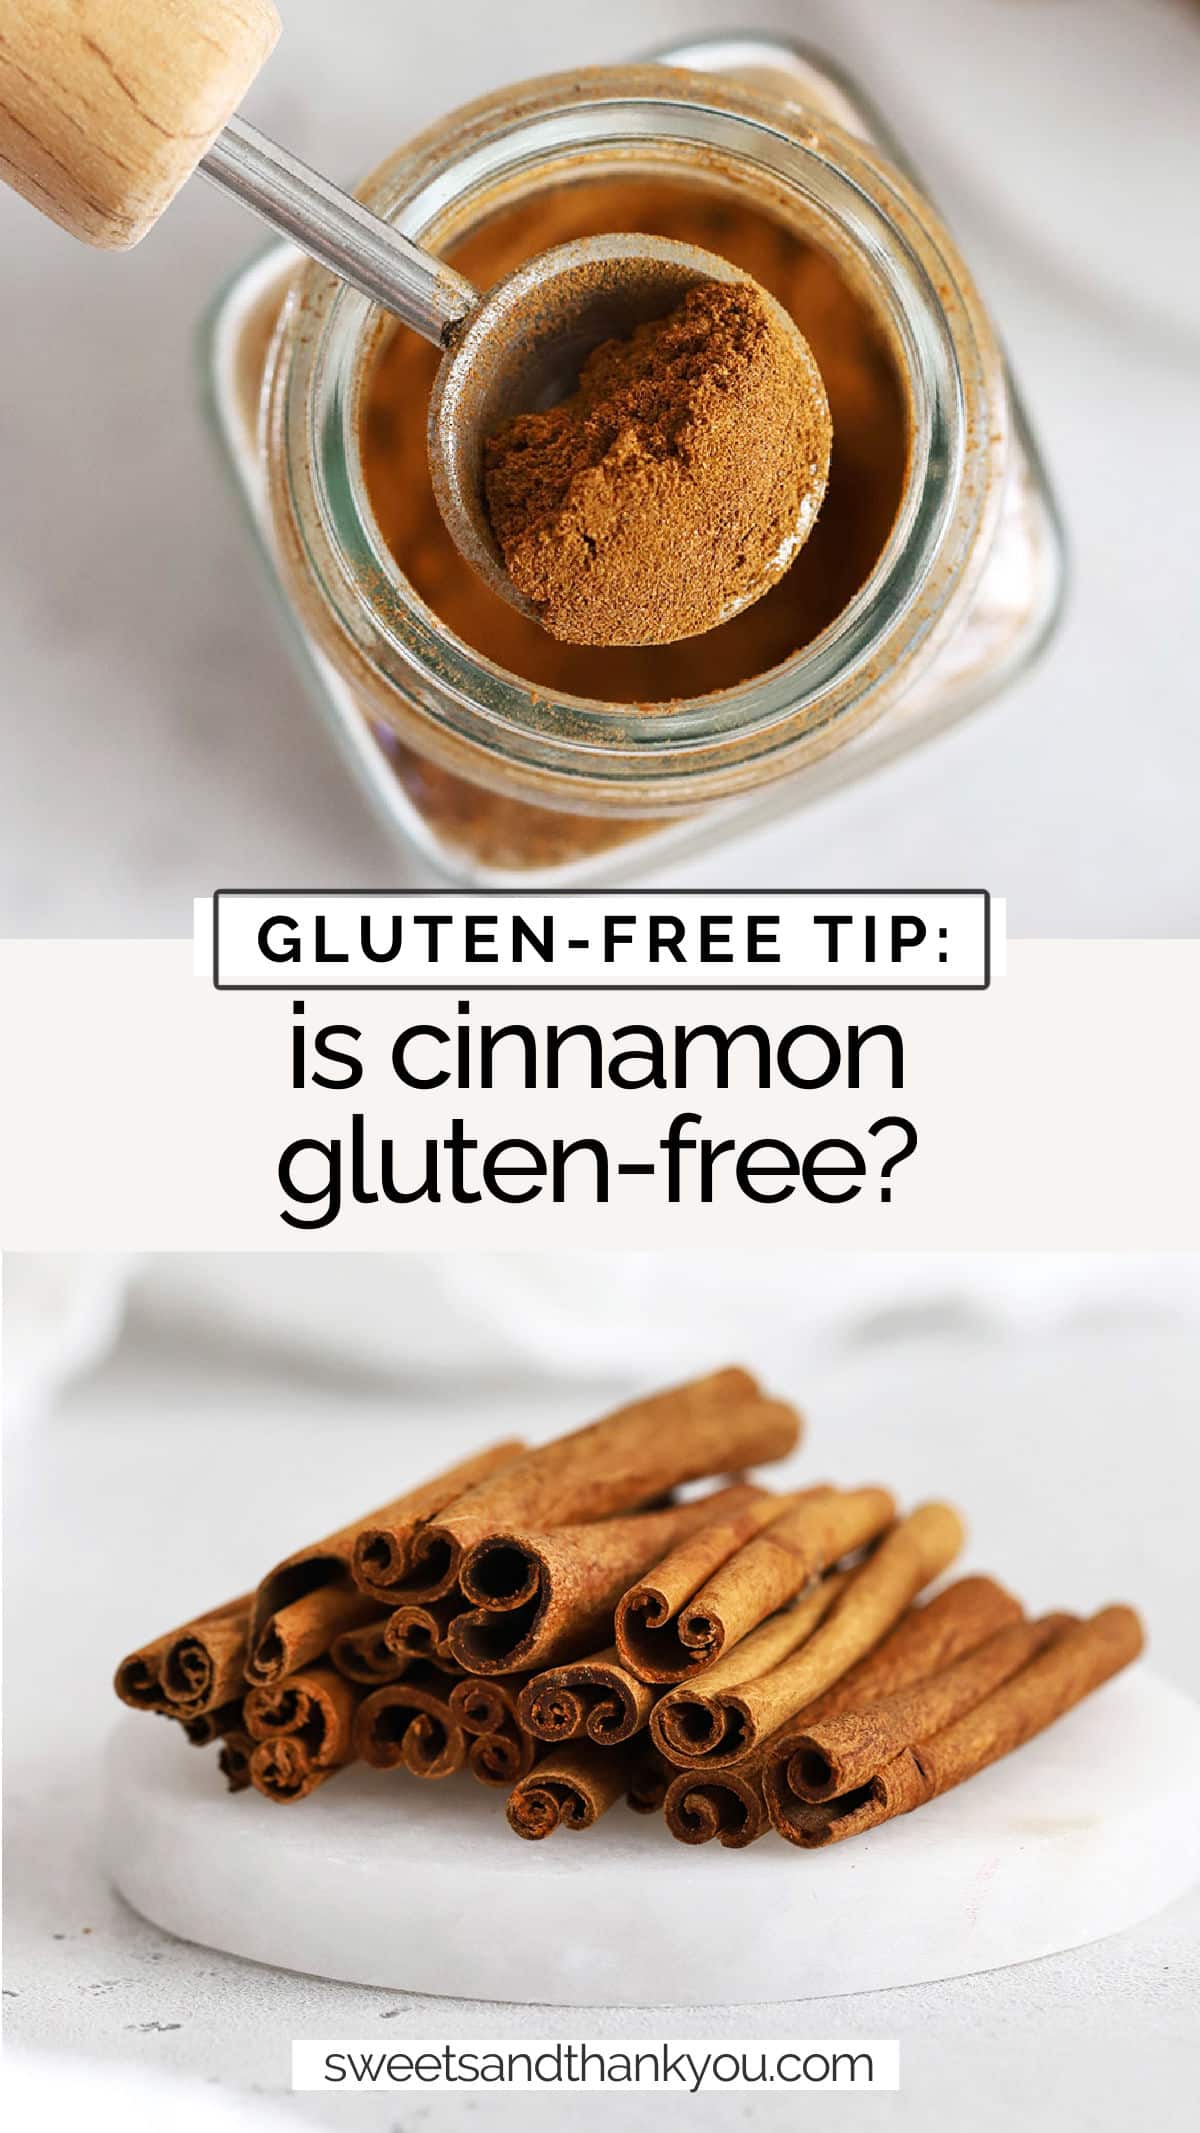 Is Cinnamon Gluten-Free? - We'll take the guesswork out of finding gluten-free cinnamon and cinnamon sticks at the grocery store! // is ground cinnamon gluten-free / are cinnamon sticks gluten-free / brands of gluten-free cinnamon / gluten free cinnamon brands / gluten free spices / gluten free baking tip